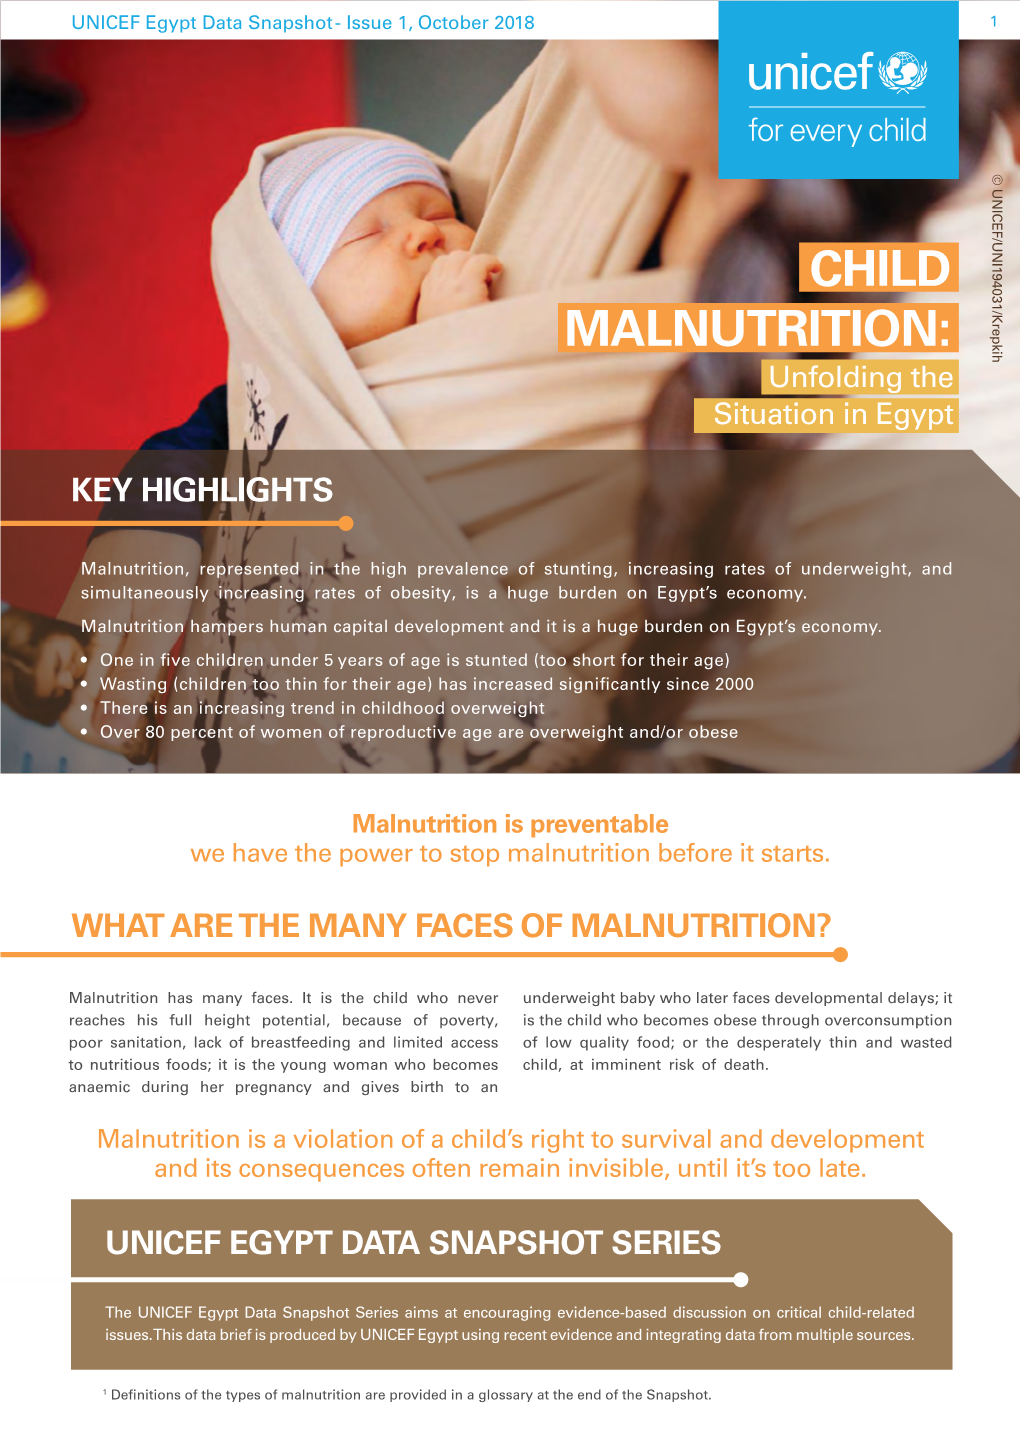 CHILD MALNUTRITION: Unfolding the Situation in Egypt